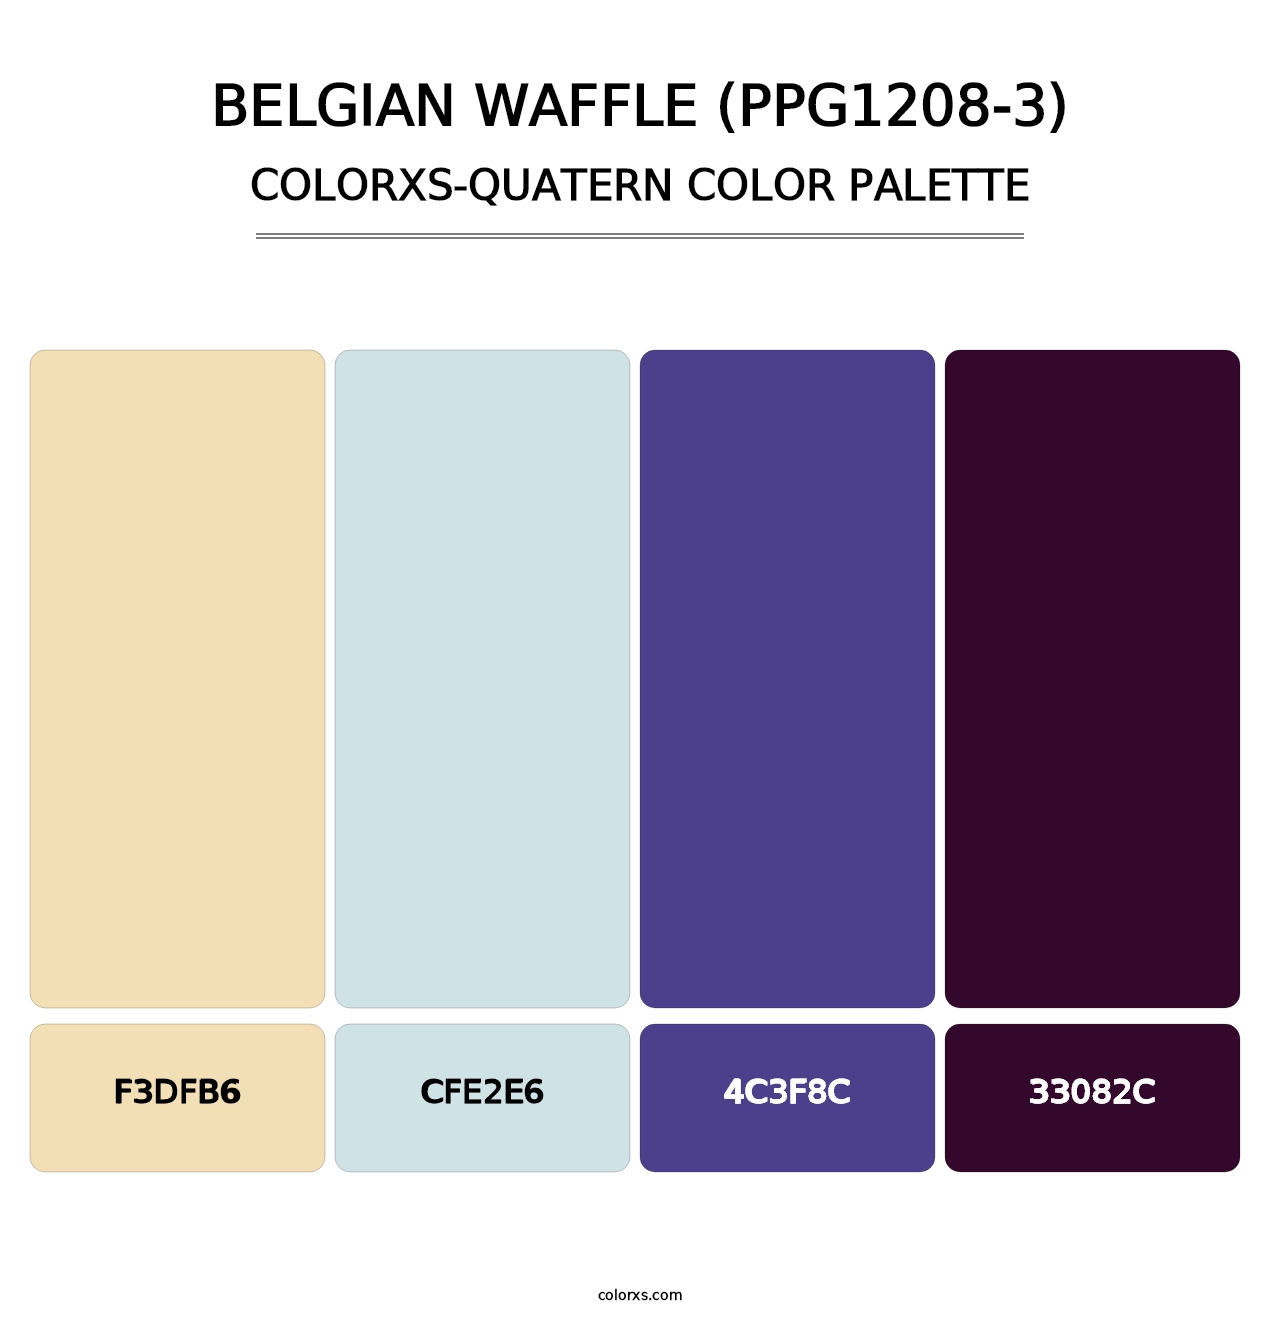 Belgian Waffle (PPG1208-3) - Colorxs Quatern Palette